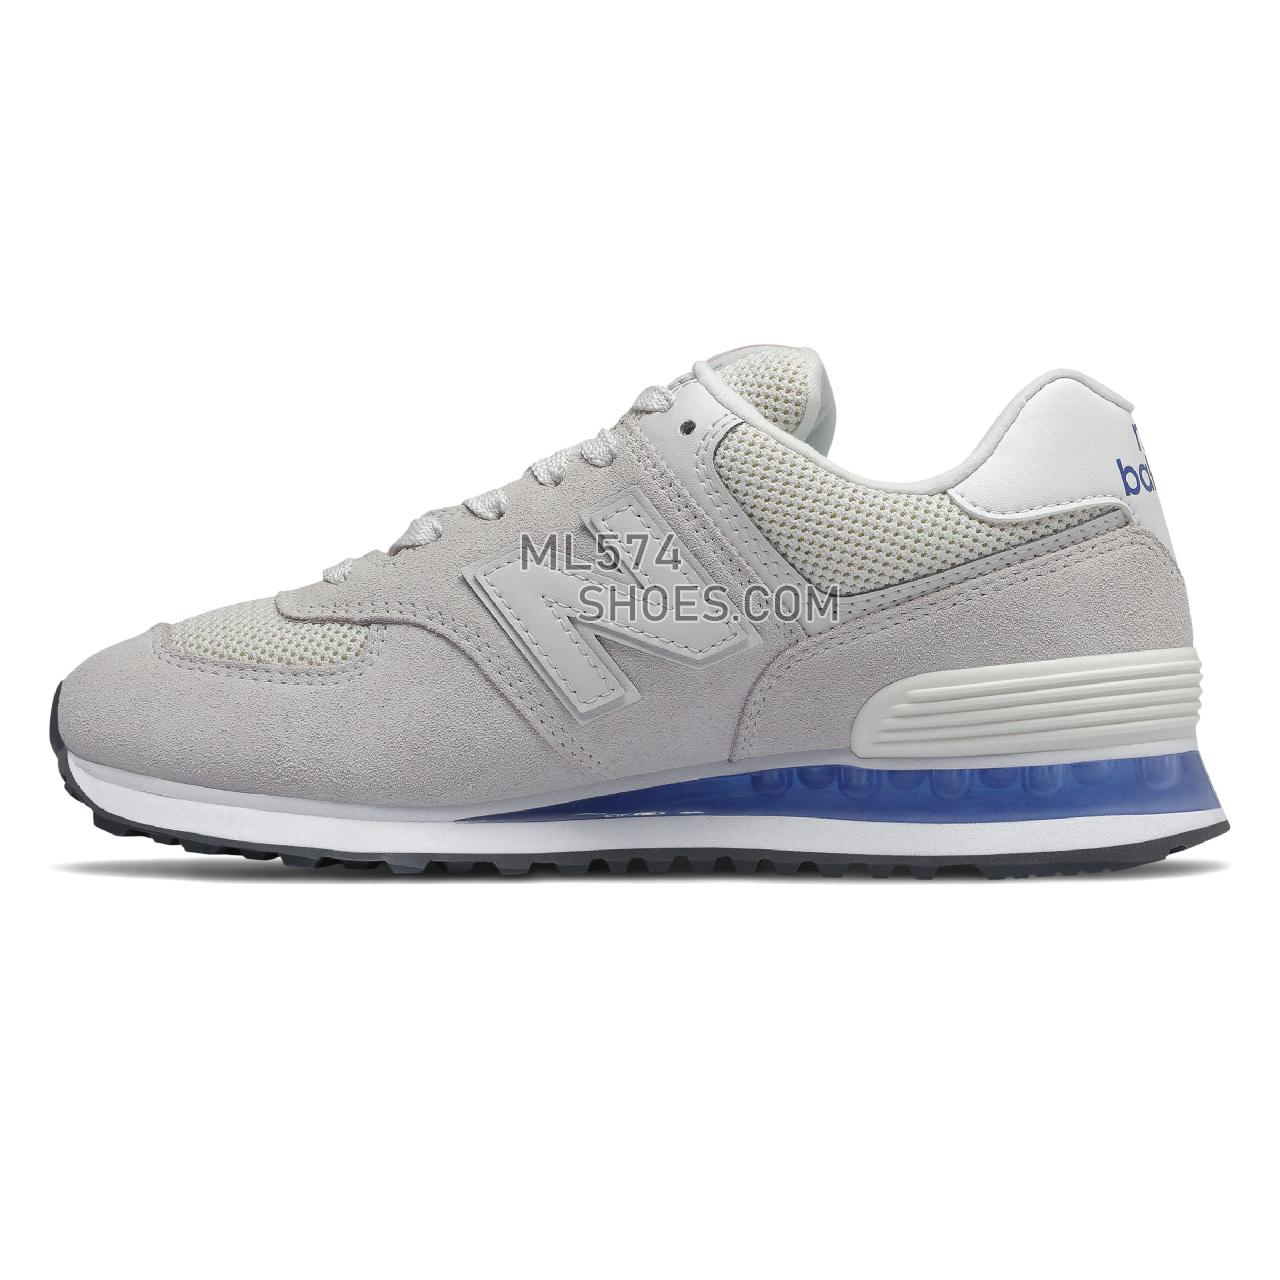 New Balance 574 - Women's Classic Sneakers - White with UV Blue - WL574NPD